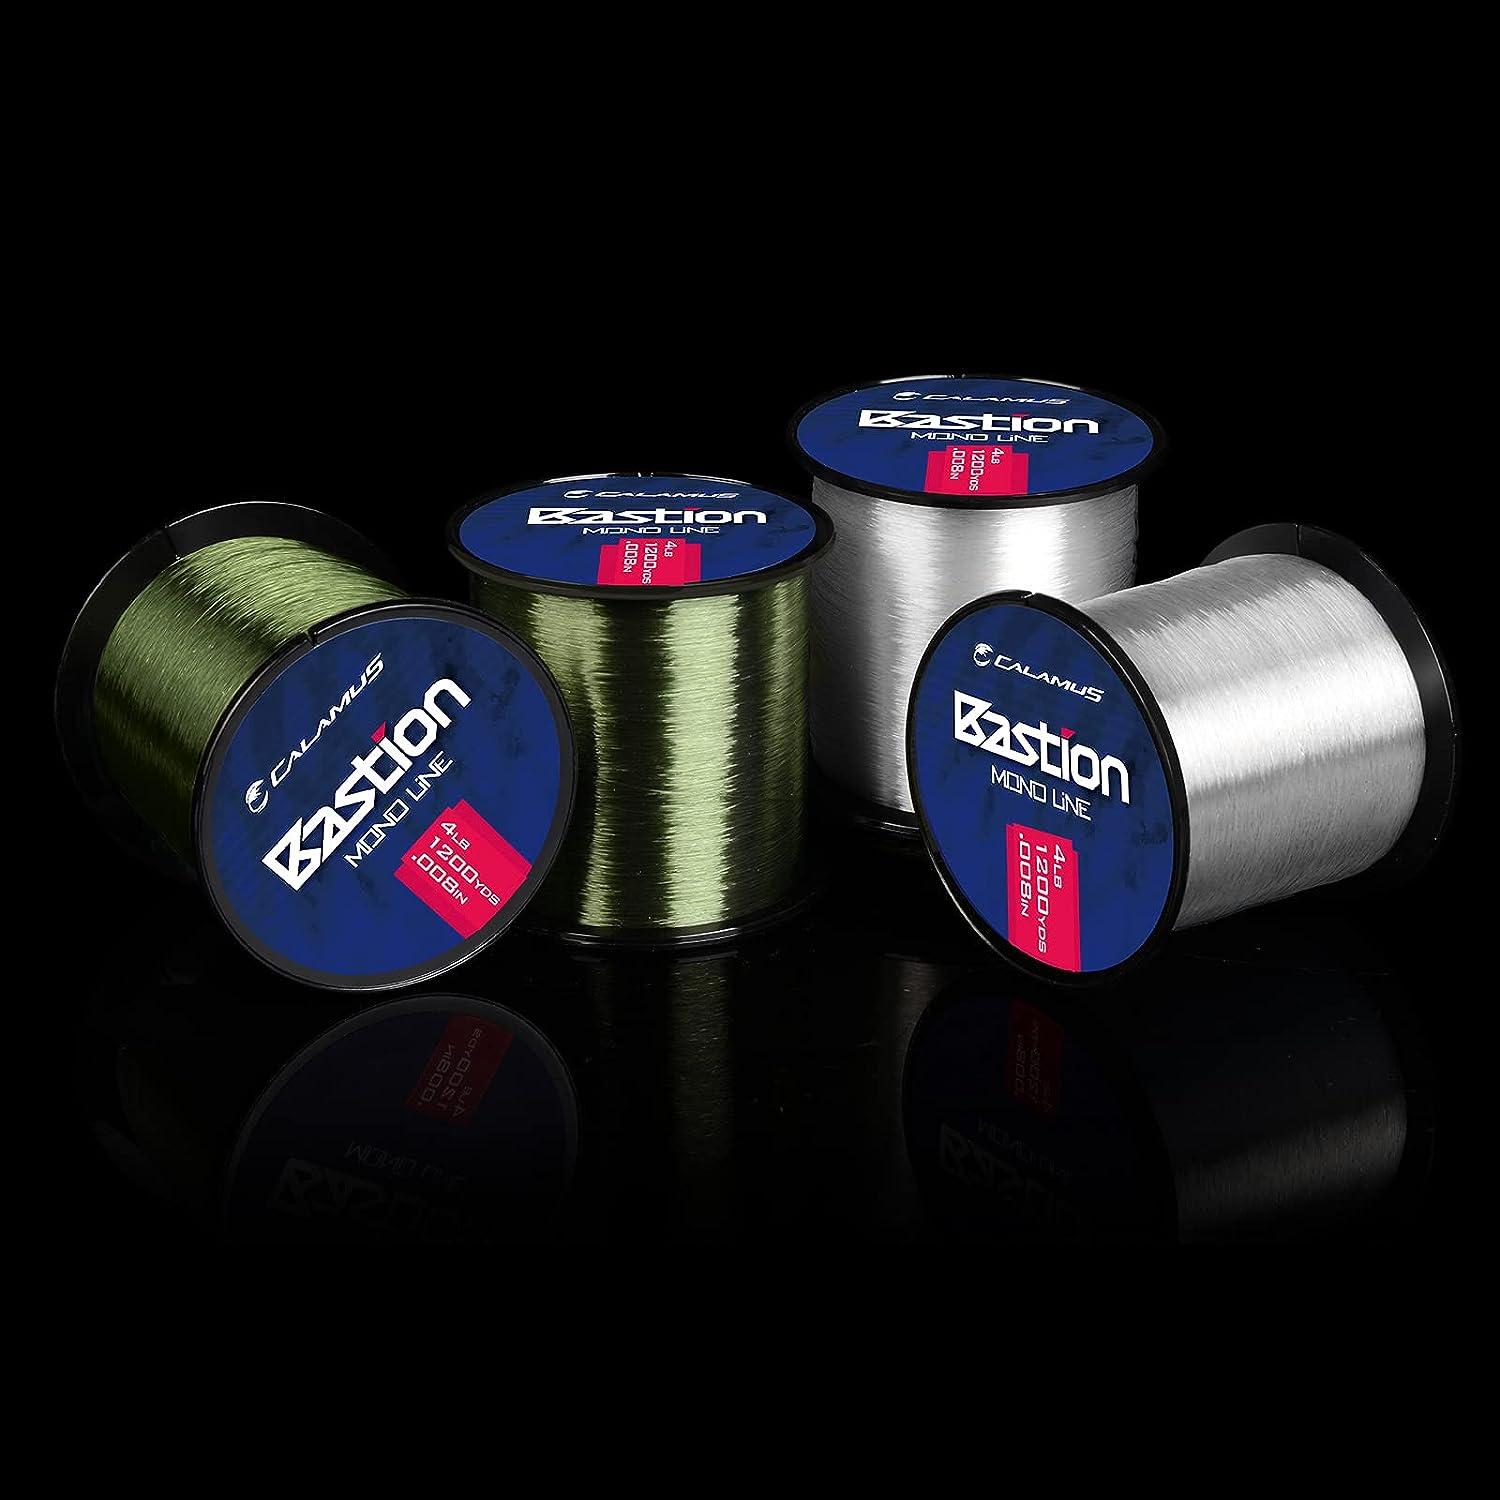 Calamus Bastion Monofilament Fishing Line - Strong Abrasion Resistant Mono  Line - Superior Nylon Material Mono Fishing Line for Freshwater and  Saltwater Fishing Clear 4LB/1200Yards (1/8LB Spool)